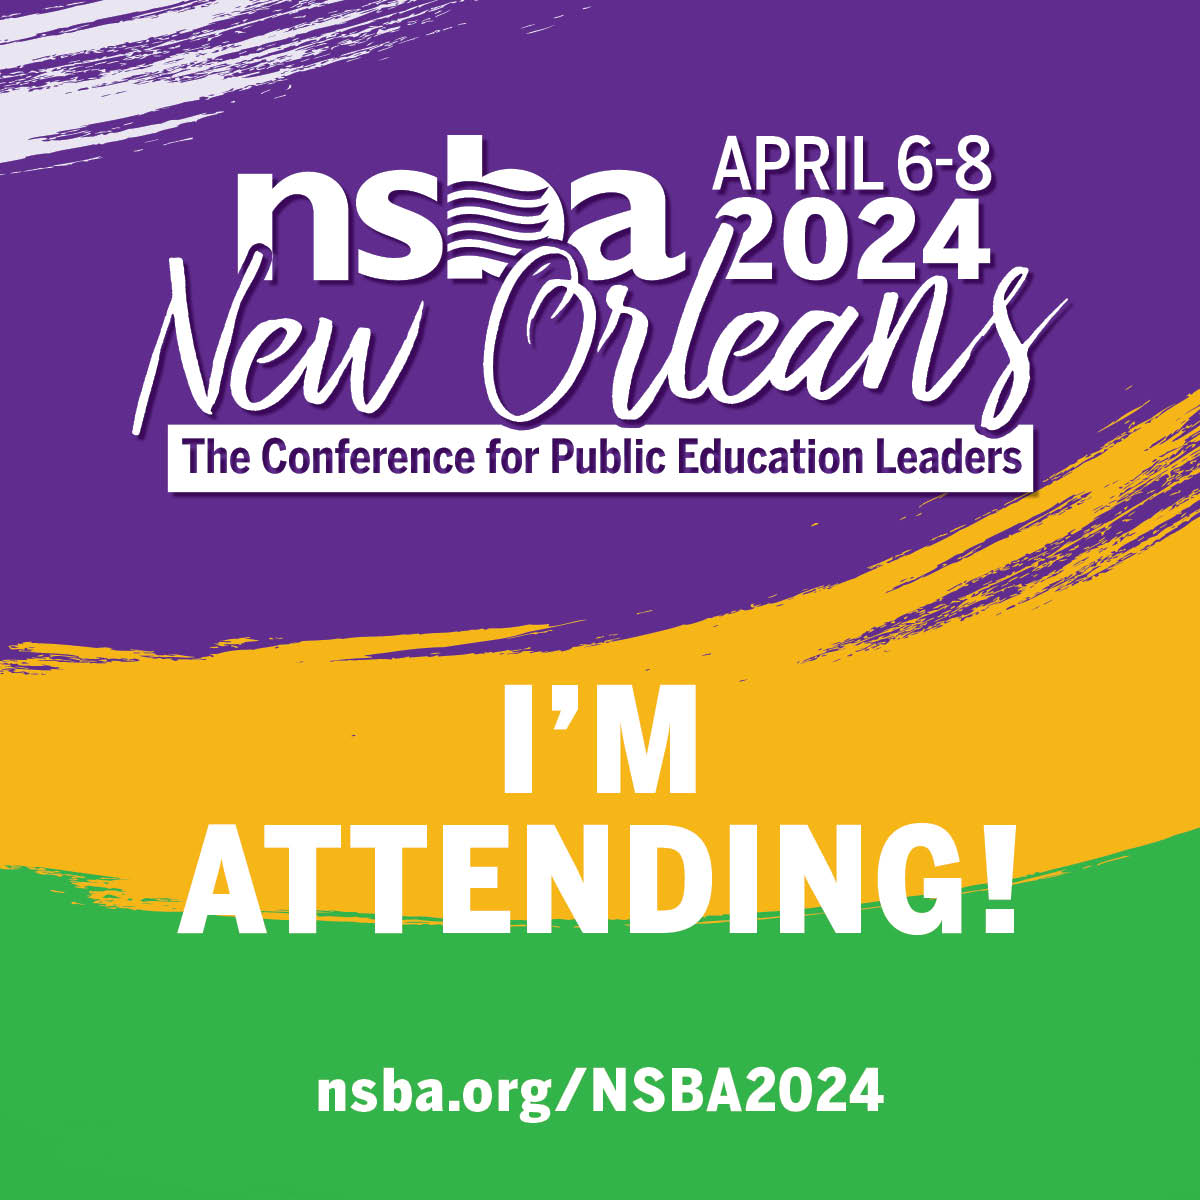 Social Media Badges NSBA 2024 Annual Conference & Exposition